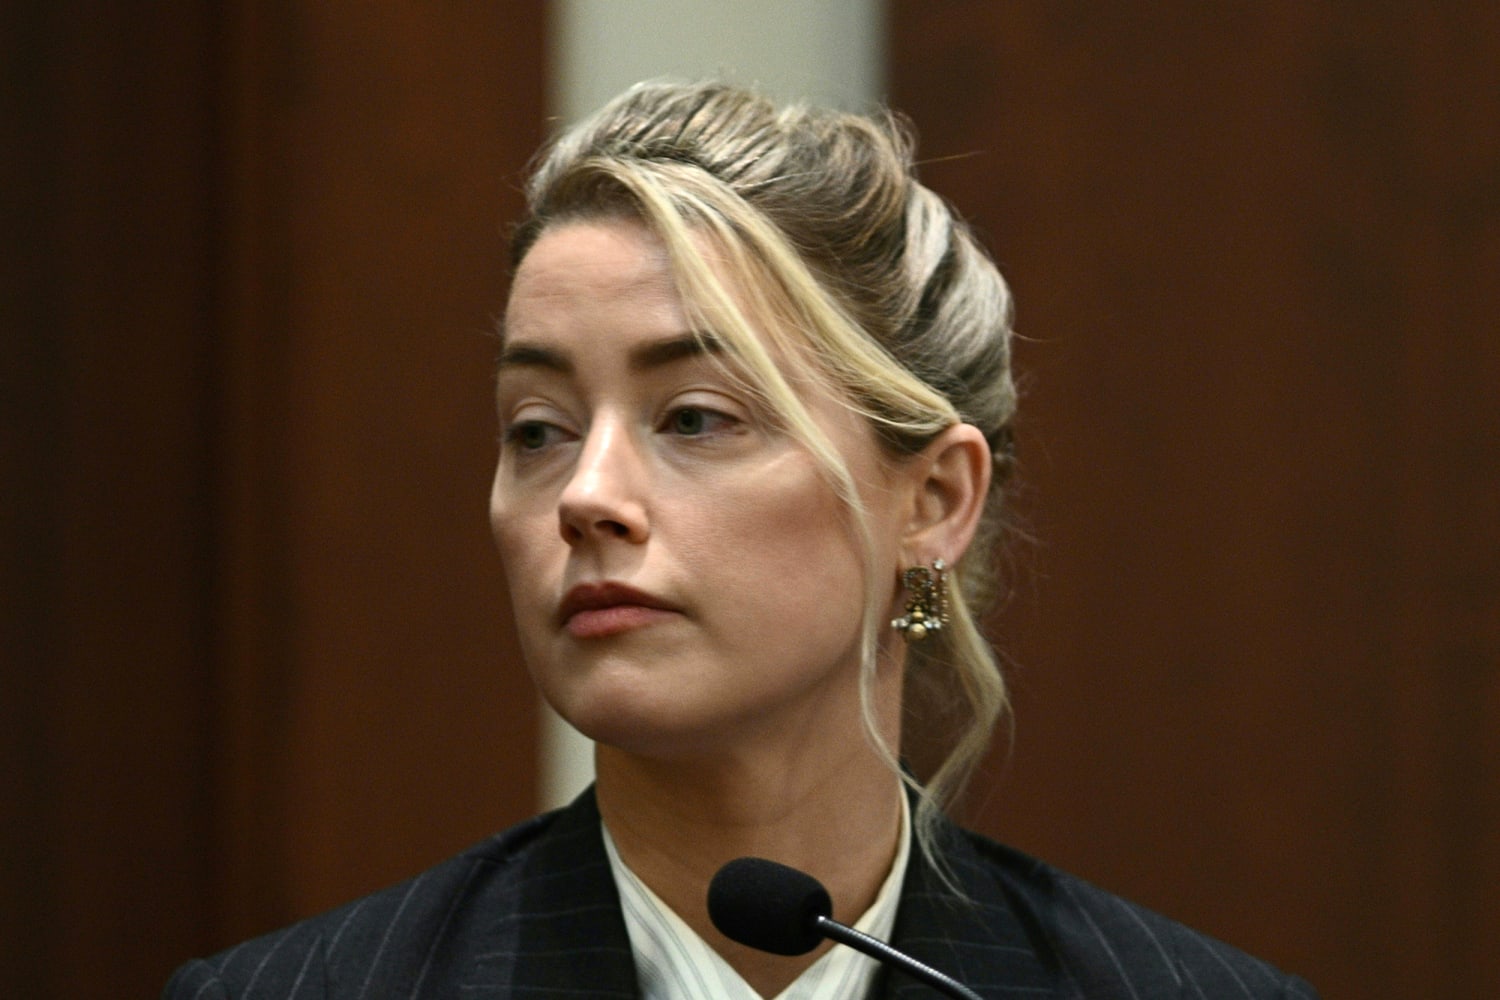 Johnny Depp-Amber Heard trial: Witnesses for Heard take stand